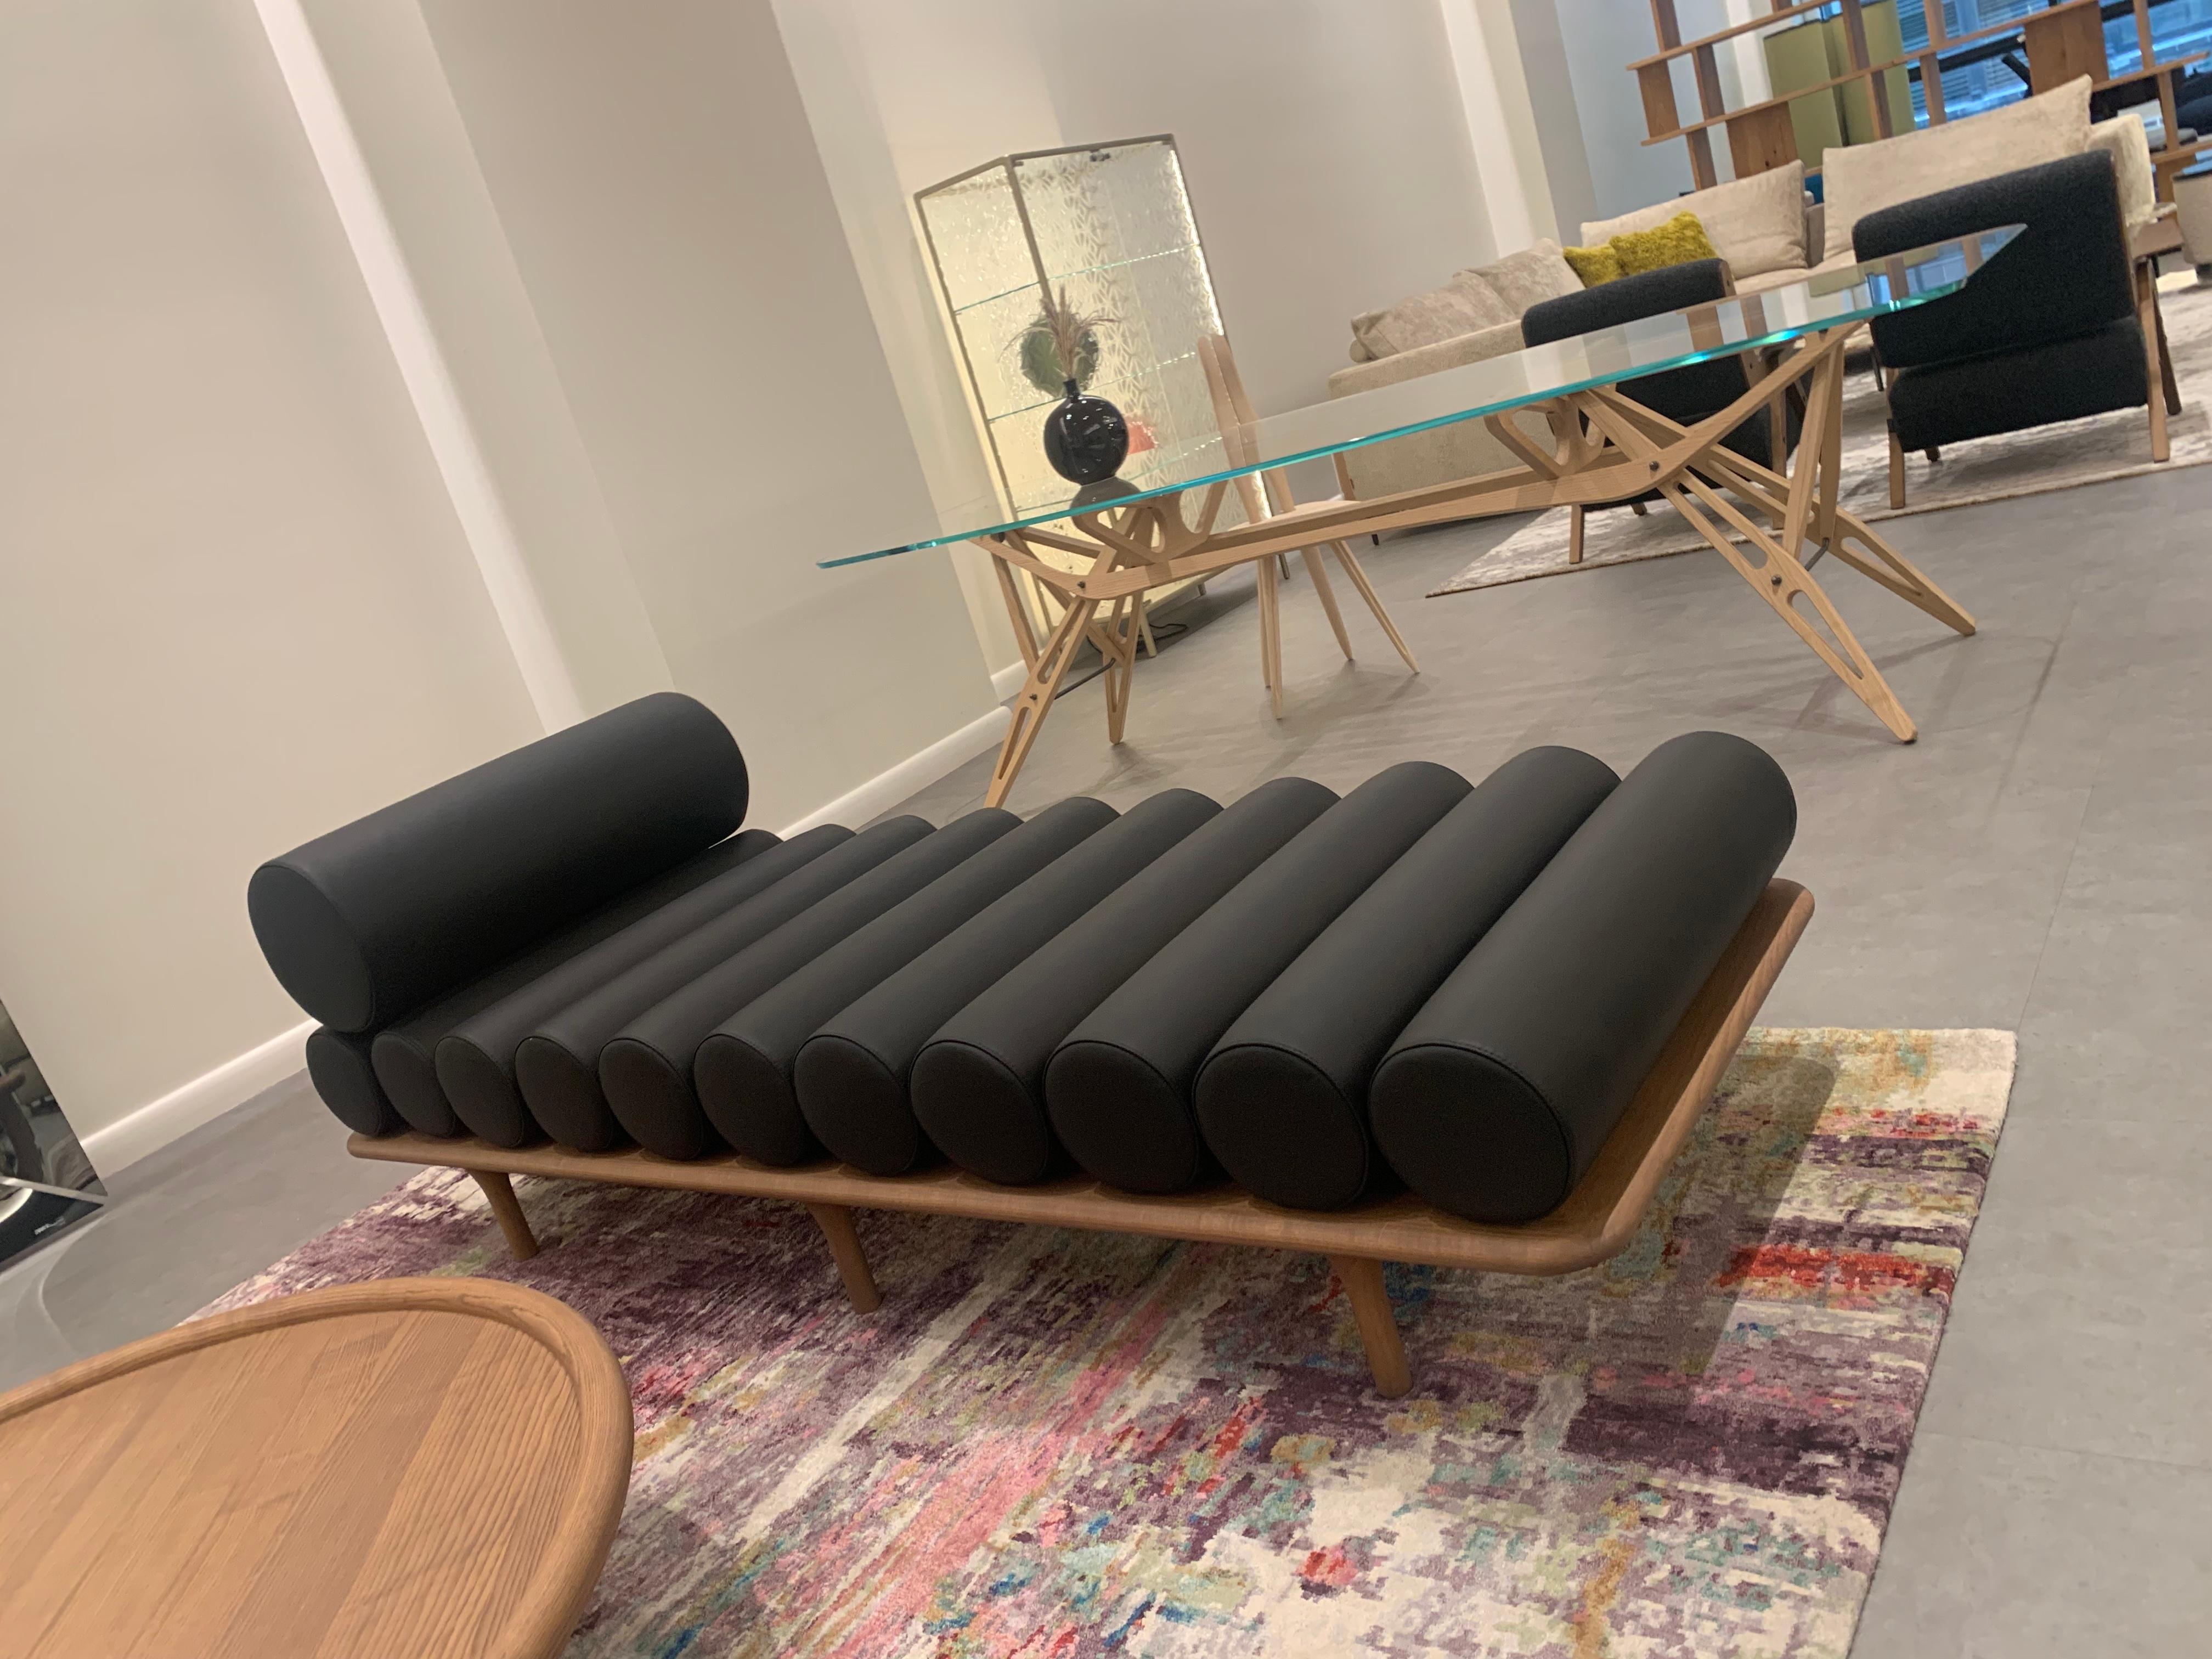 upholstered in:
Art. Pelle Anilina Cat. Pelle Anilla Col. 03
Walnut base
Tacchini is pleased to present you a sneak-peek of the new collection, in collaboration with Studiopepe: Five to Nine, a modern daybed that could turn into waiting seat,